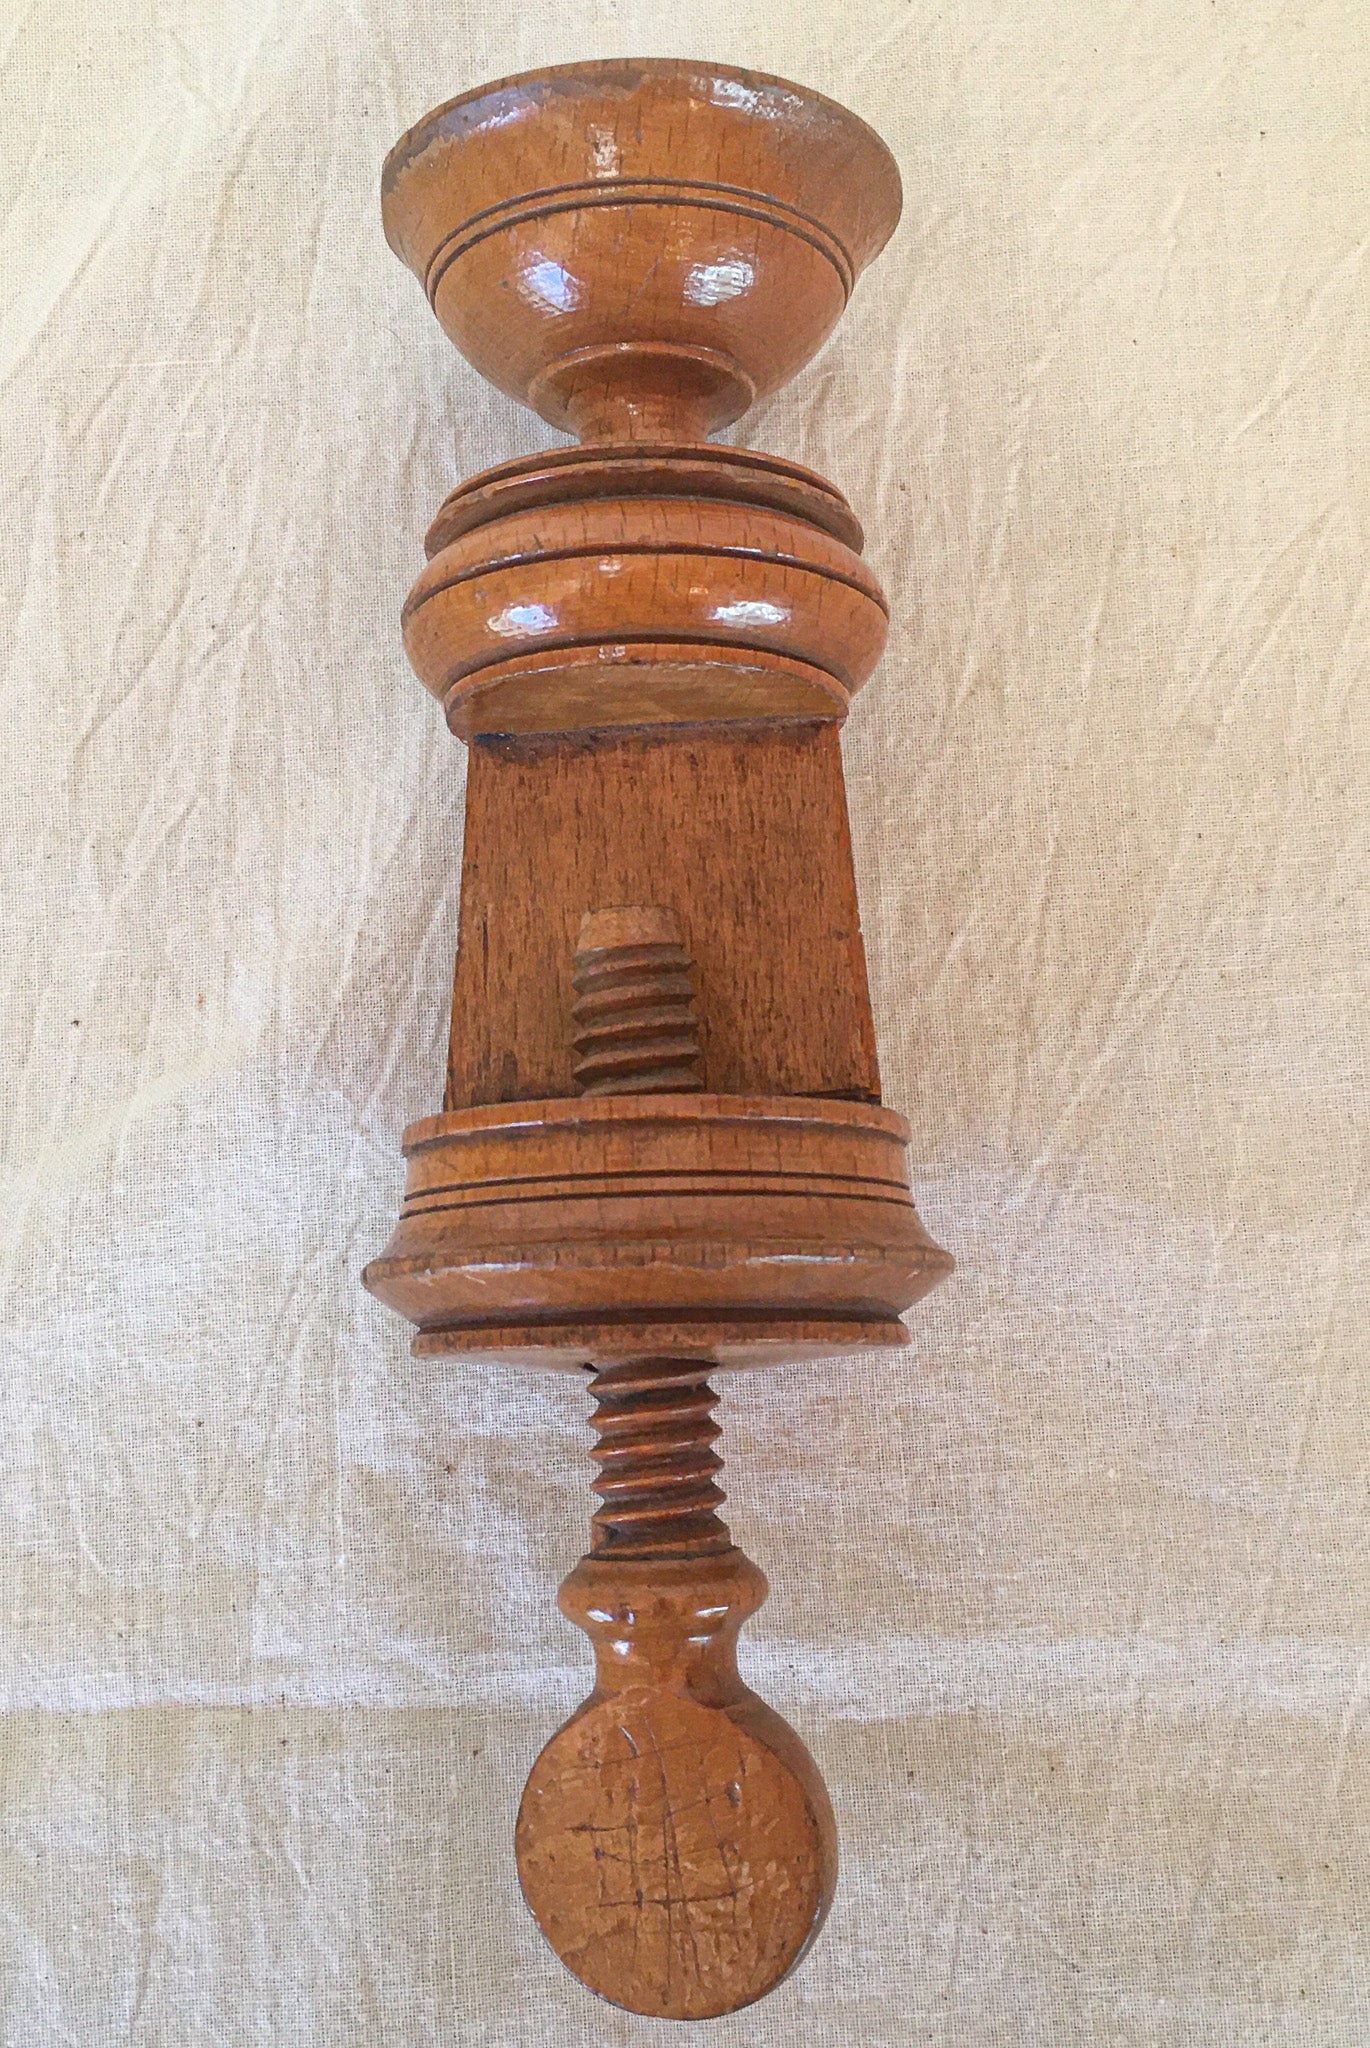 Antique Wooden Sewing Clamp